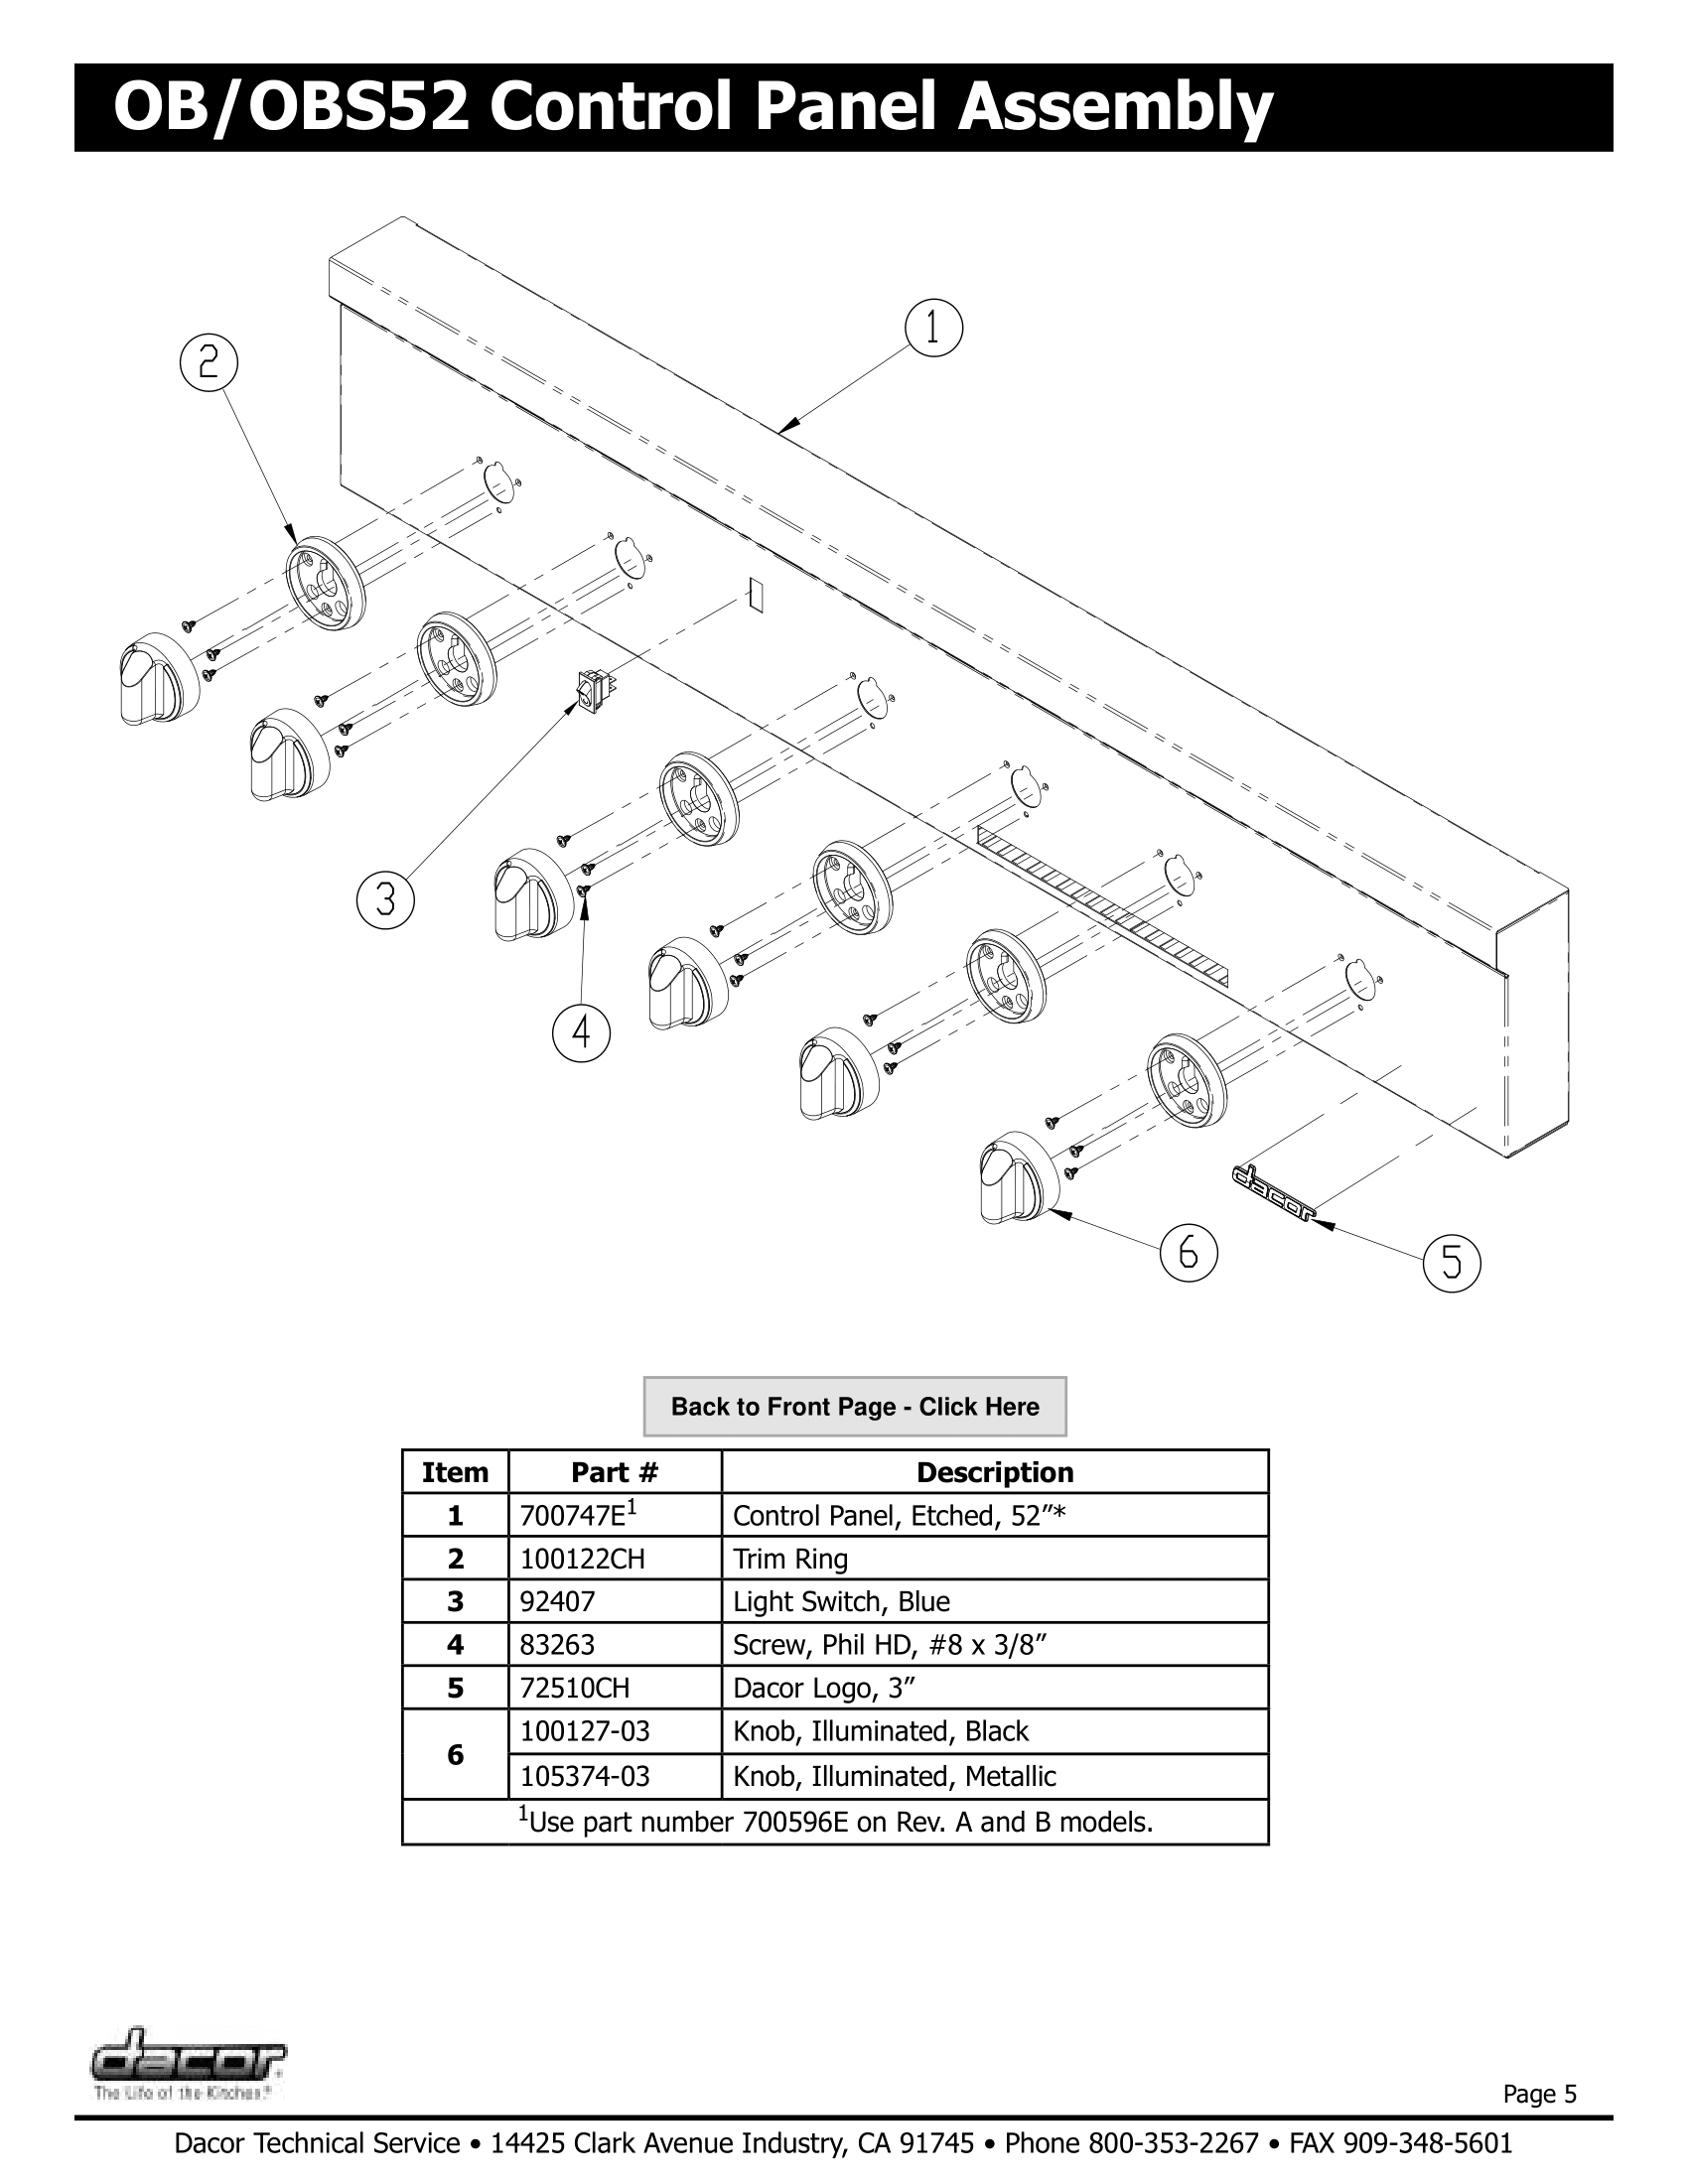 Dacor OBS52 Control Panel Assembly Schematic